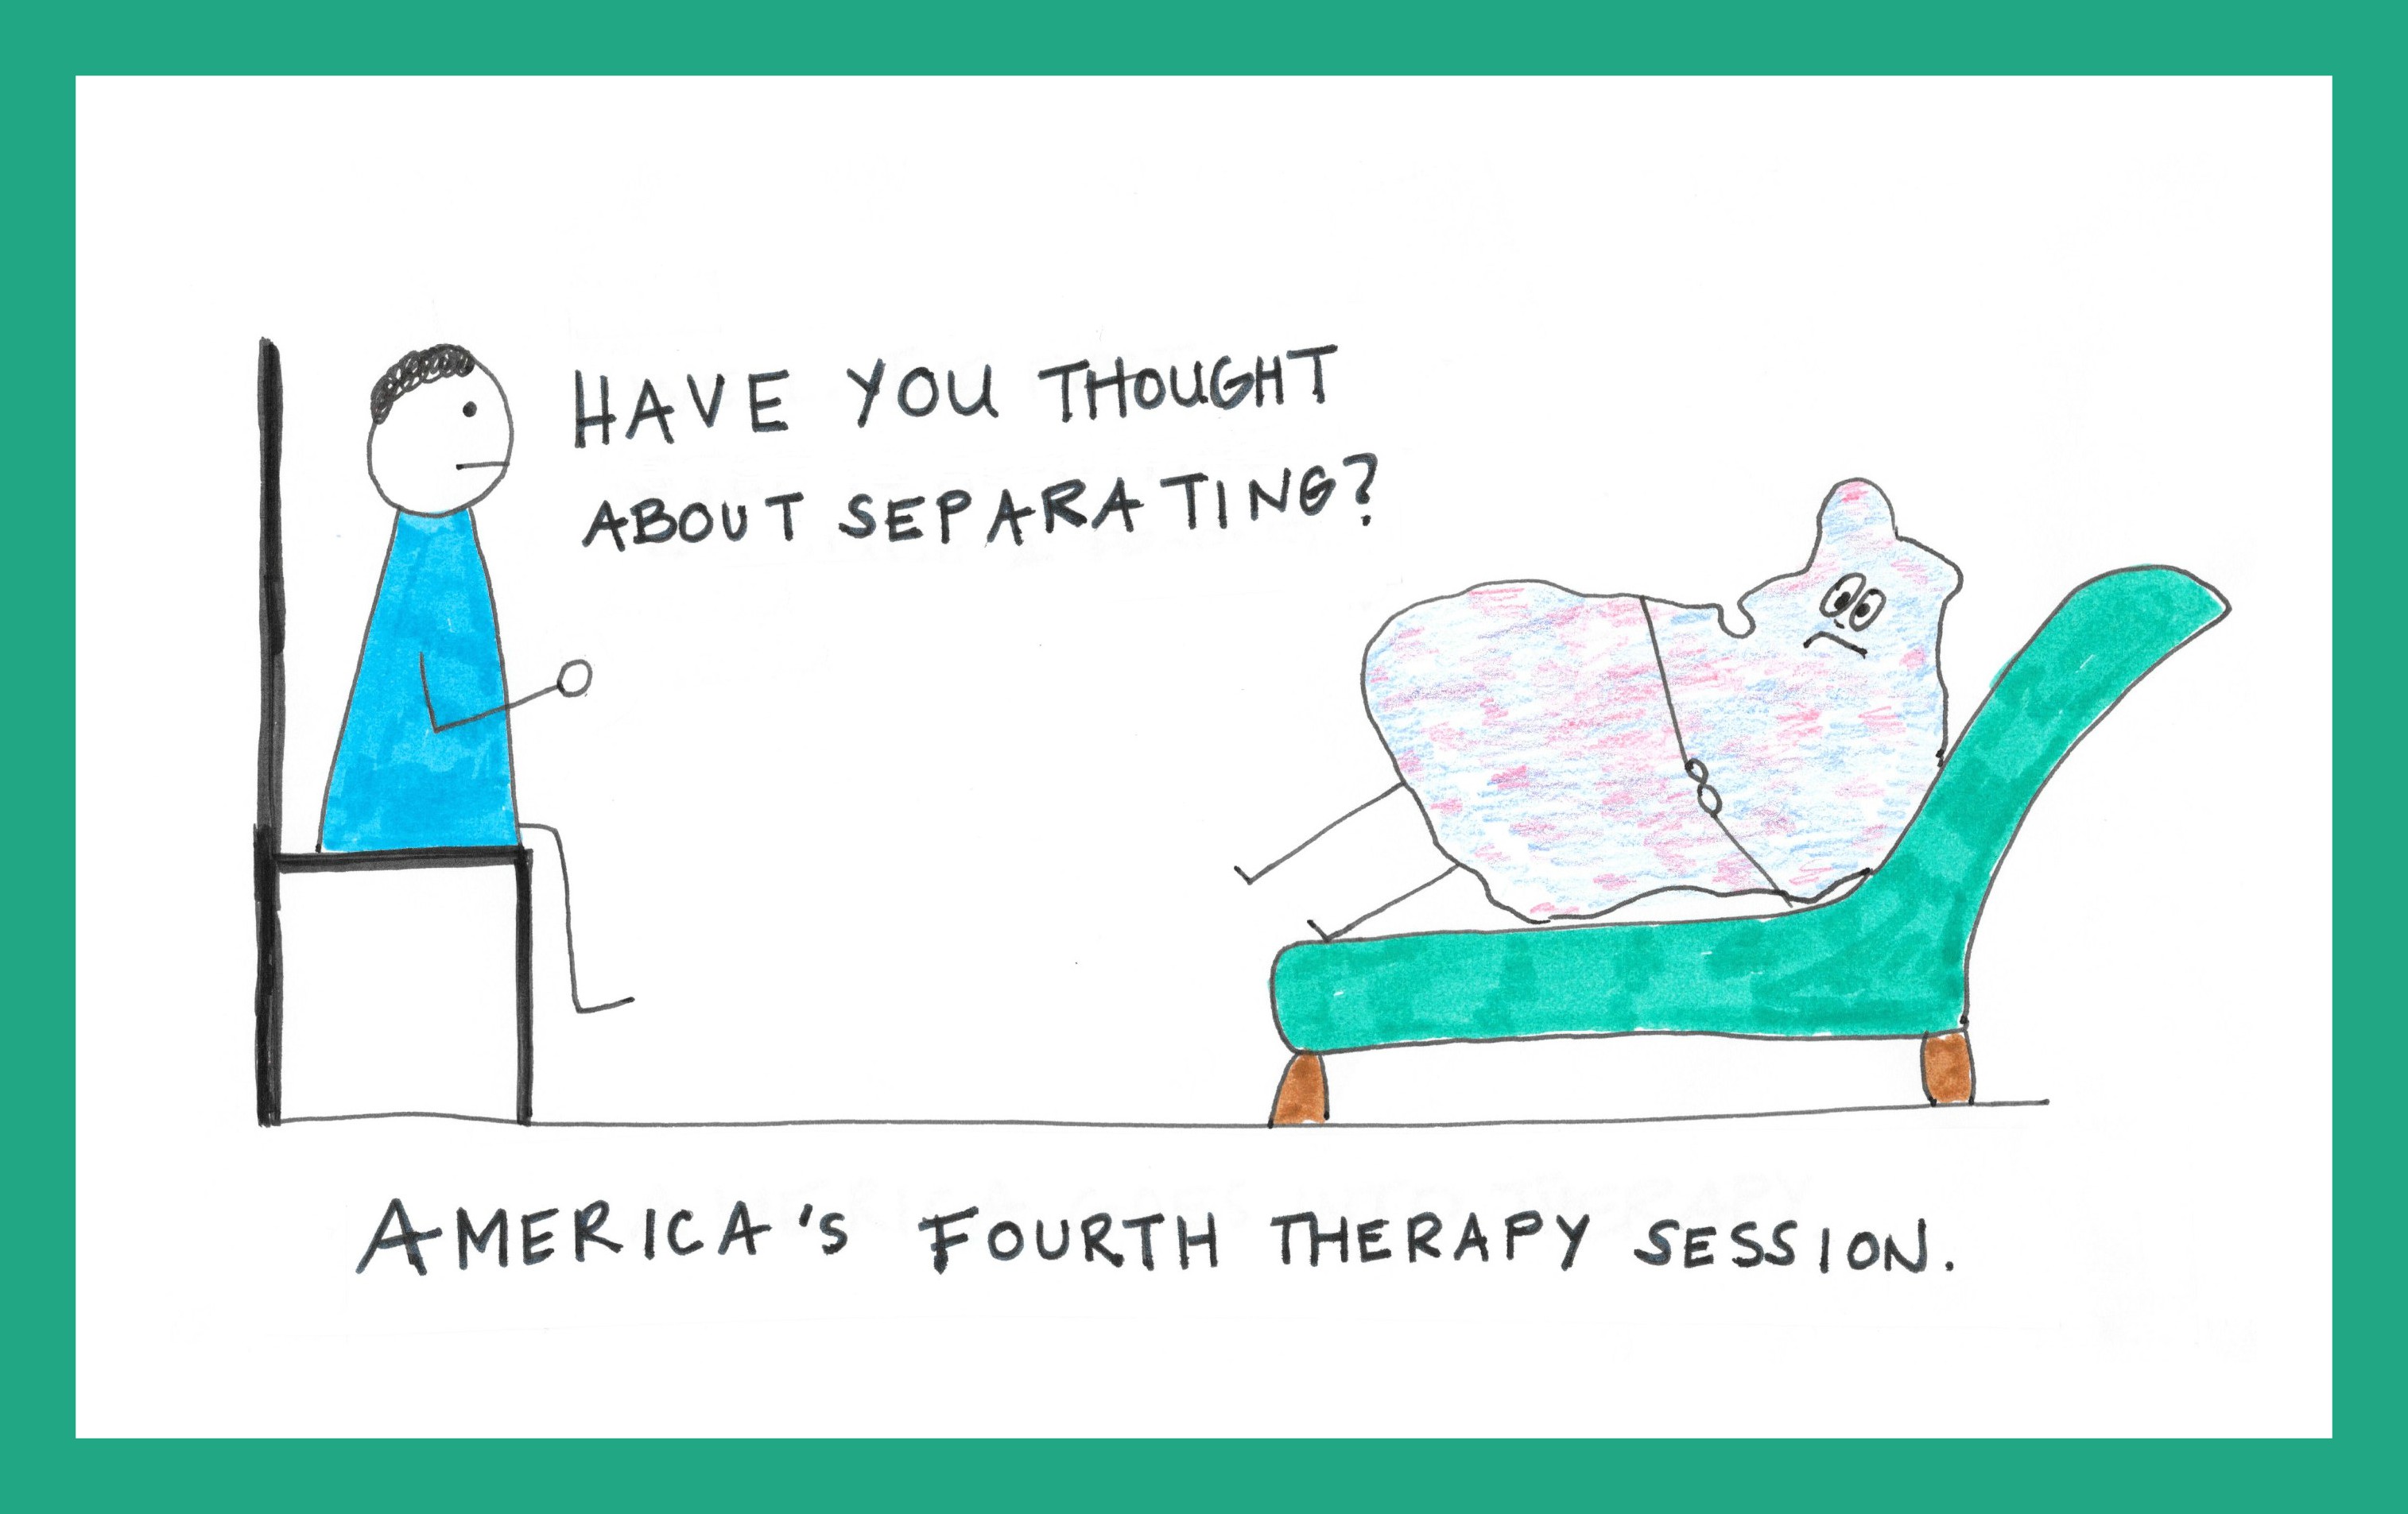 America's Fourth Therapy Session